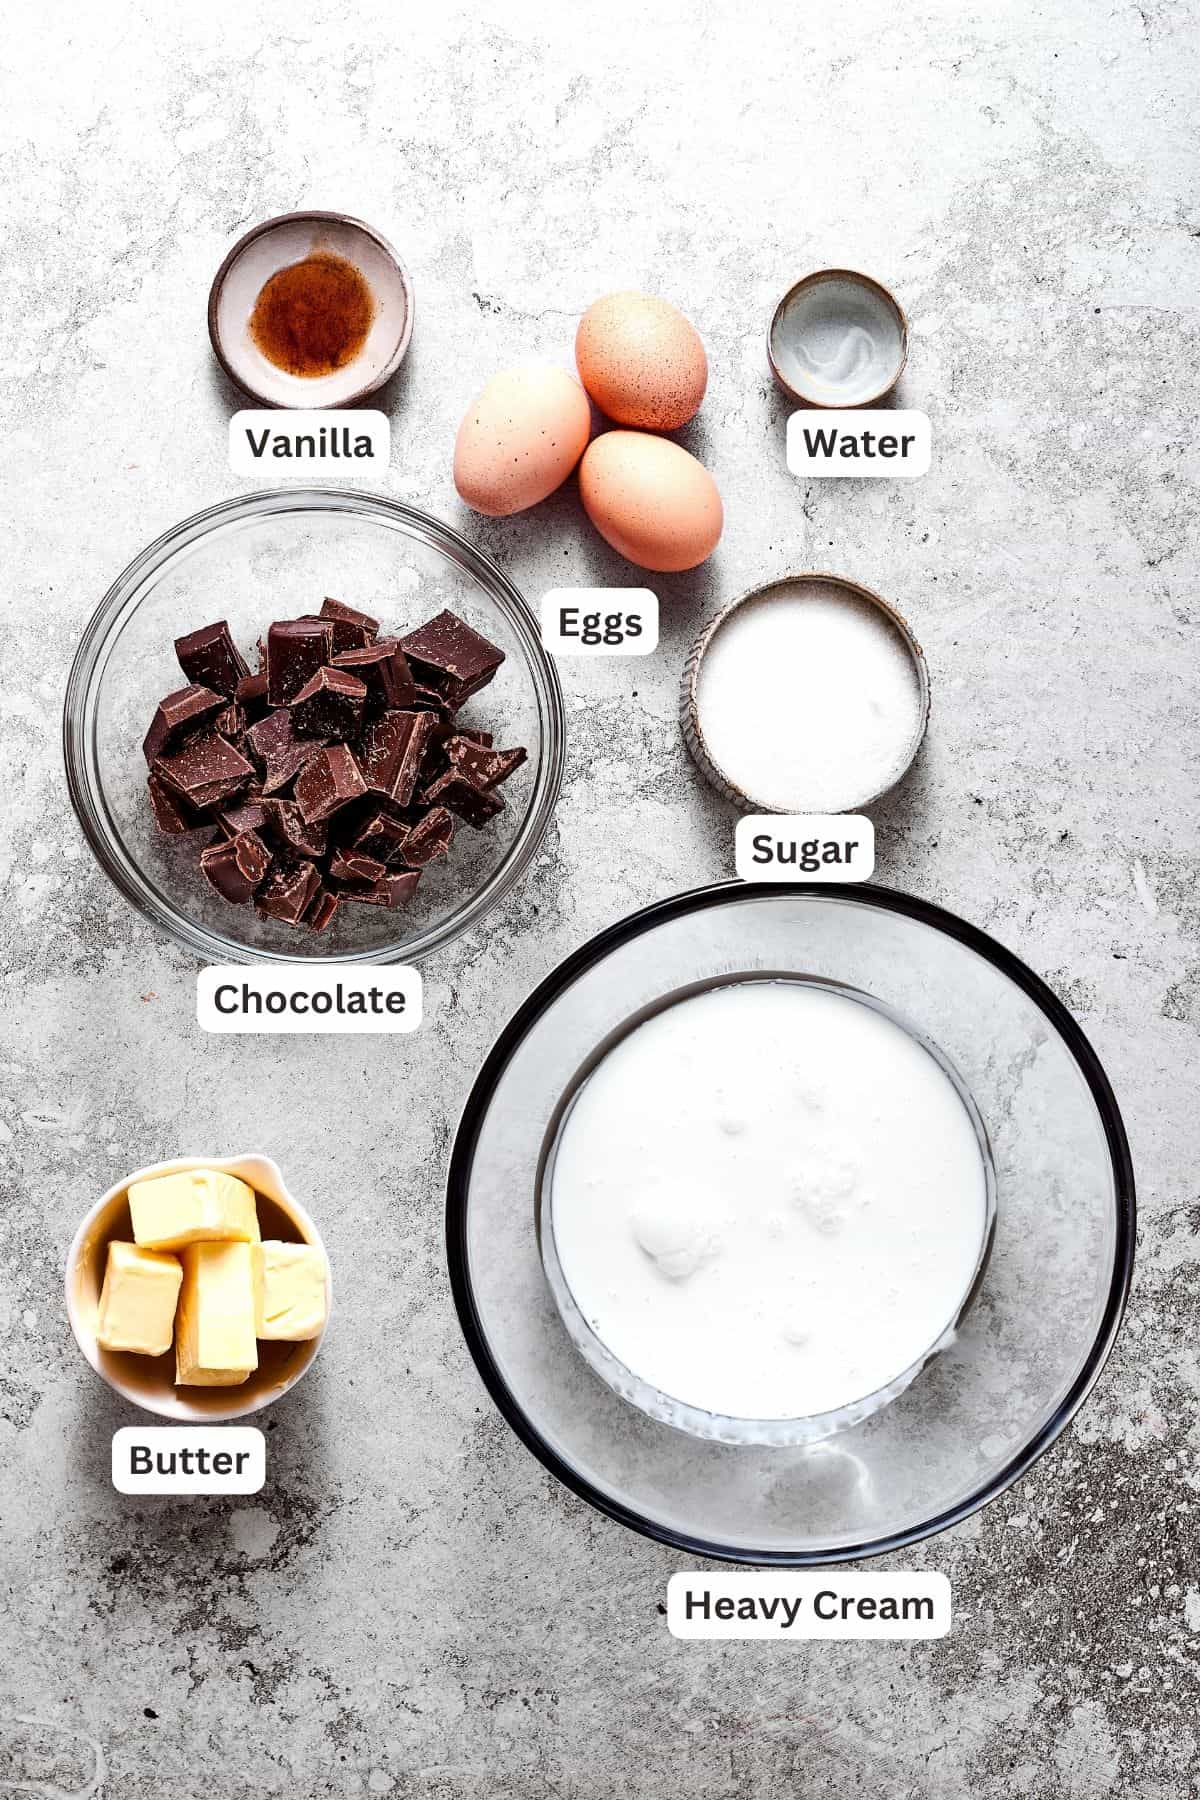 The filling ingredients for French silk pie are shown: chocolate, eggs, vanilla, cream, water, sugar, butter.